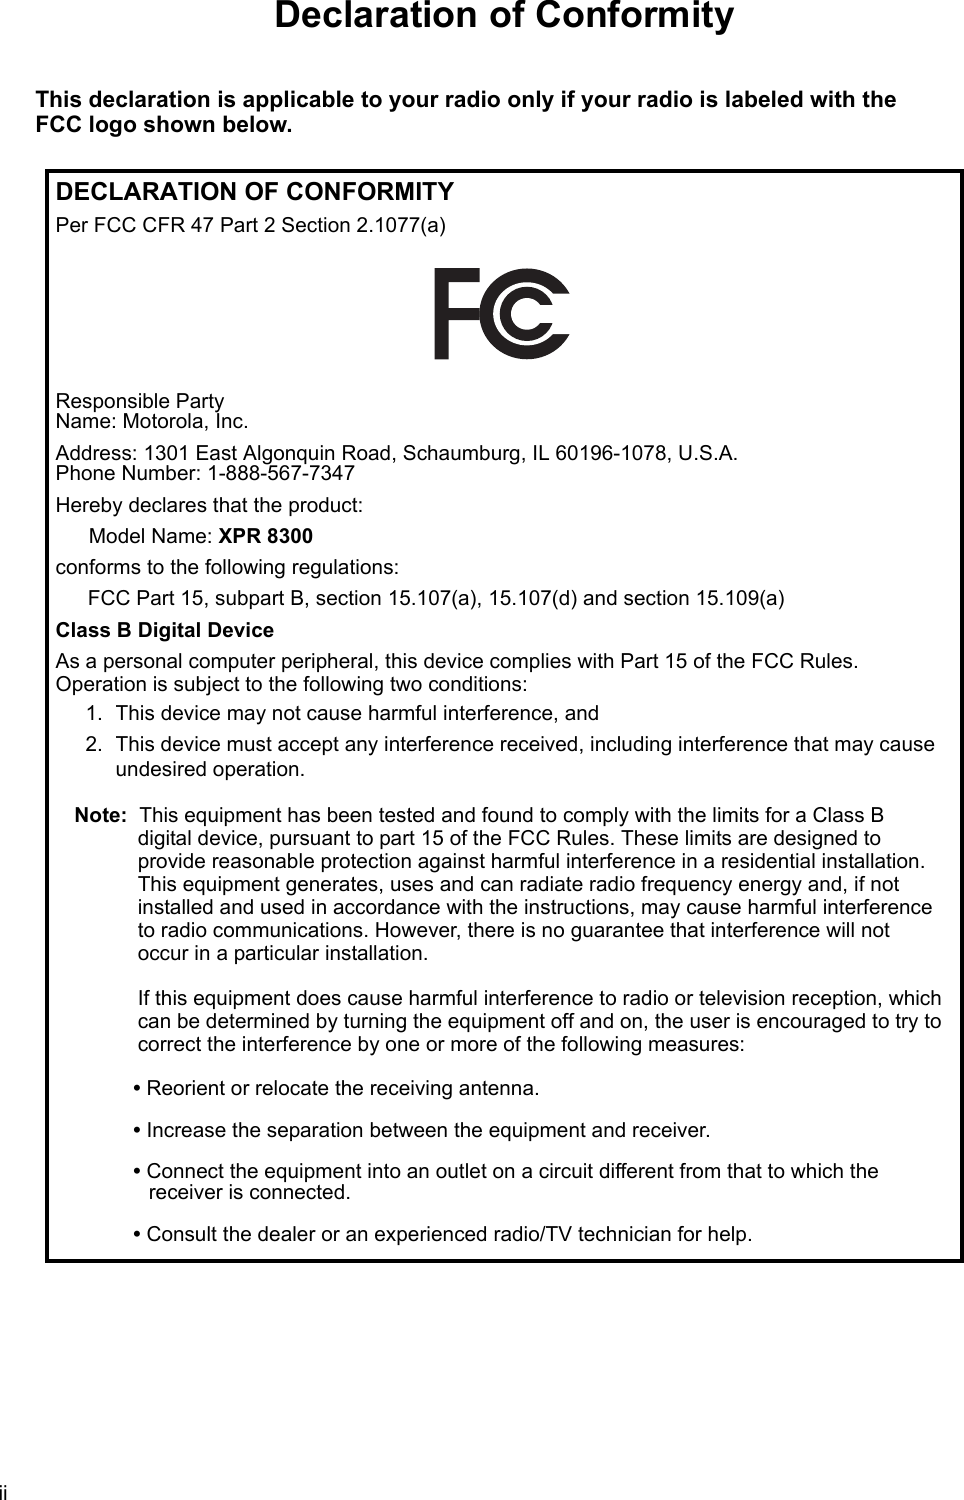 iiDeclaration of ConformityThis declaration is applicable to your radio only if your radio is labeled with the FCC logo shown below.DECLARATION OF CONFORMITYPer FCC CFR 47 Part 2 Section 2.1077(a)Responsible Party  Name: Motorola, Inc.Address: 1301 East Algonquin Road, Schaumburg, IL 60196-1078, U.S.A. Phone Number: 1-888-567-7347Hereby declares that the product:Model Name: XPR 8300conforms to the following regulations:FCC Part 15, subpart B, section 15.107(a), 15.107(d) and section 15.109(a)Class B Digital DeviceAs a personal computer peripheral, this device complies with Part 15 of the FCC Rules.  Operation is subject to the following two conditions:1. This device may not cause harmful interference, and 2. This device must accept any interference received, including interference that may cause undesired operation.Note: This equipment has been tested and found to comply with the limits for a Class B  digital device, pursuant to part 15 of the FCC Rules. These limits are designed to  provide reasonable protection against harmful interference in a residential installation.  This equipment generates, uses and can radiate radio frequency energy and, if not installed and used in accordance with the instructions, may cause harmful interference  to radio communications. However, there is no guarantee that interference will not  occur in a particular installation.   If this equipment does cause harmful interference to radio or television reception, which can be determined by turning the equipment off and on, the user is encouraged to try to correct the interference by one or more of the following measures:• Reorient or relocate the receiving antenna.• Increase the separation between the equipment and receiver.• Connect the equipment into an outlet on a circuit different from that to which the  receiver is connected. • Consult the dealer or an experienced radio/TV technician for help.